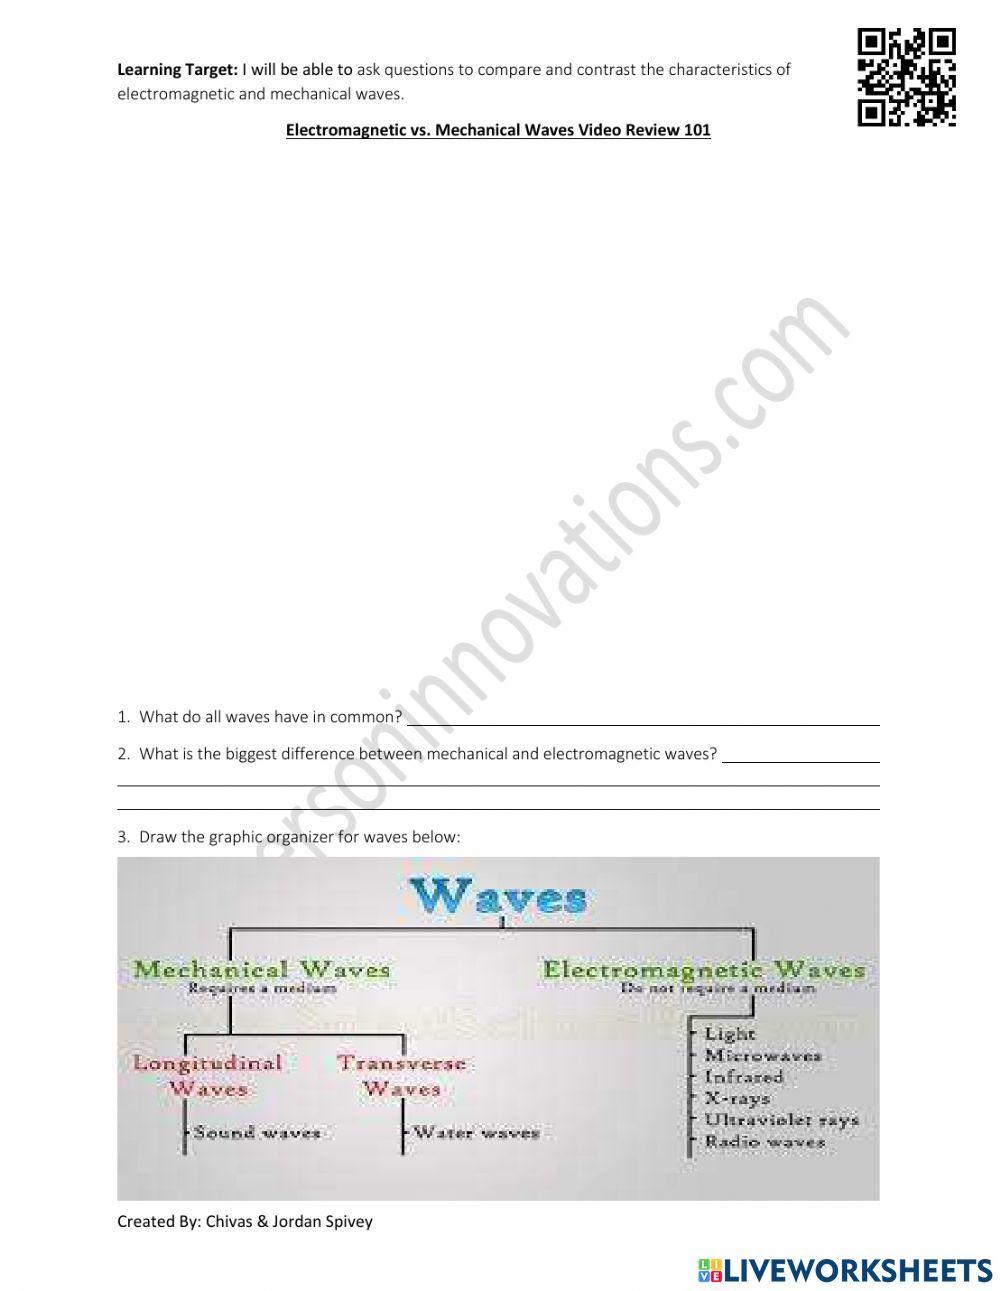 Electromagnetic vs. Mechanical Waves Video Notes